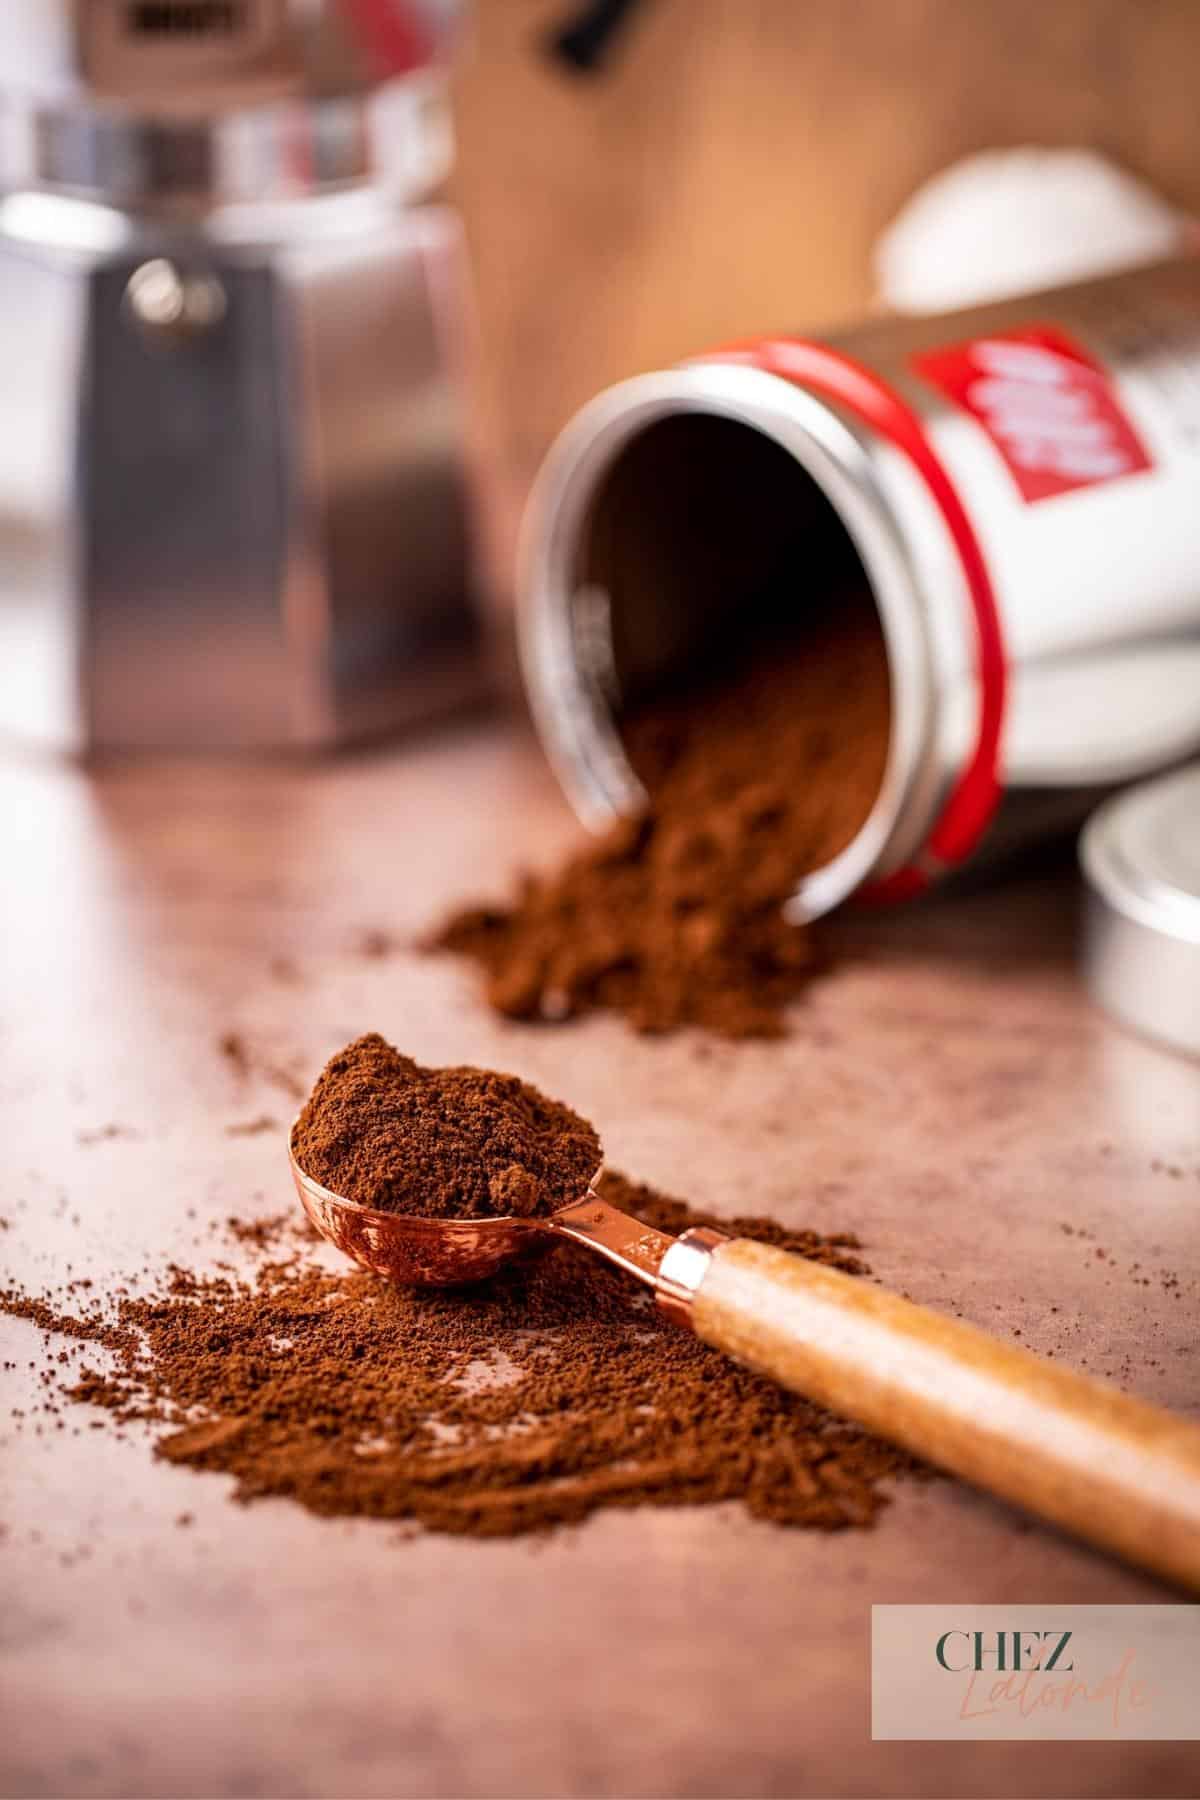 a tablespoon of illy coffee on the counter.